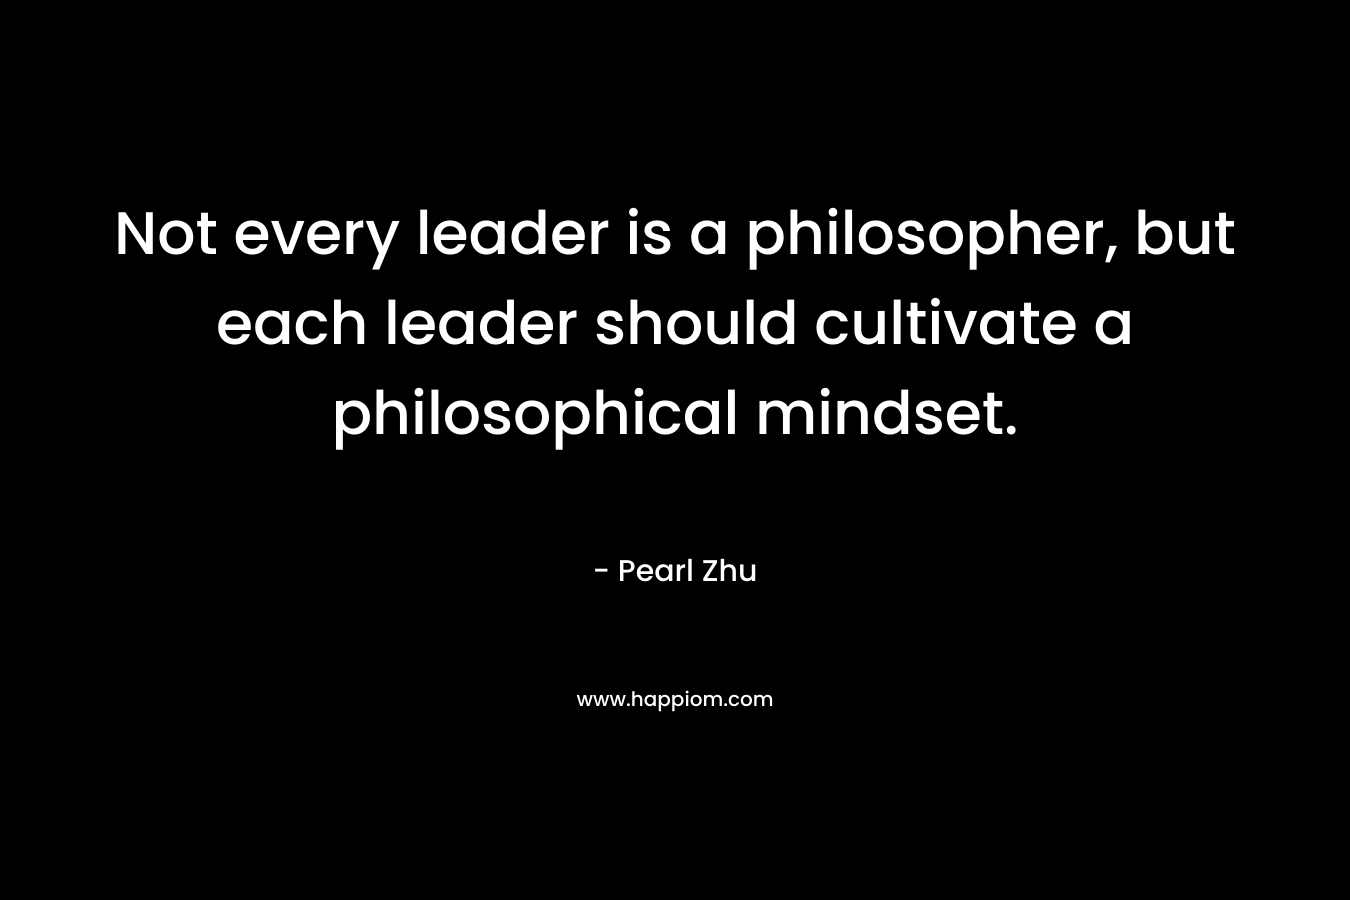 Not every leader is a philosopher, but each leader should cultivate a philosophical mindset.